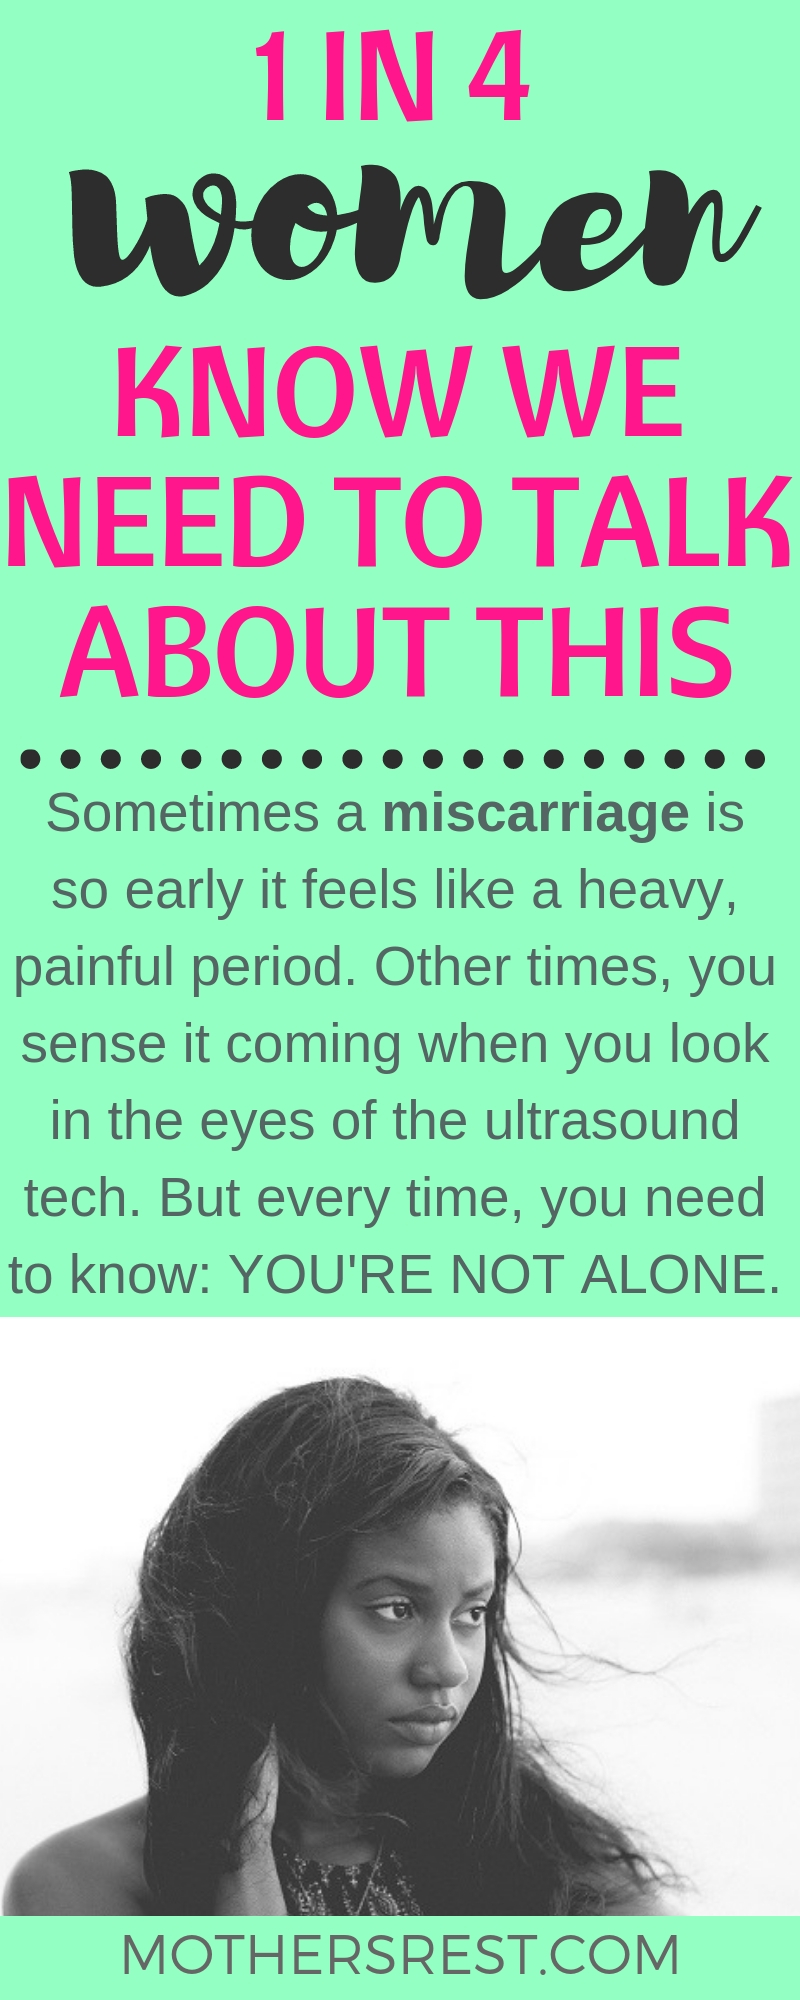 Sometimes a miscarriage is so early it feels like a heavy, painful period. Other times, you sense it coming when you look in the eyes of the ultrasound tech. But every time, you need to know: YOU ARE NOT ALONE.